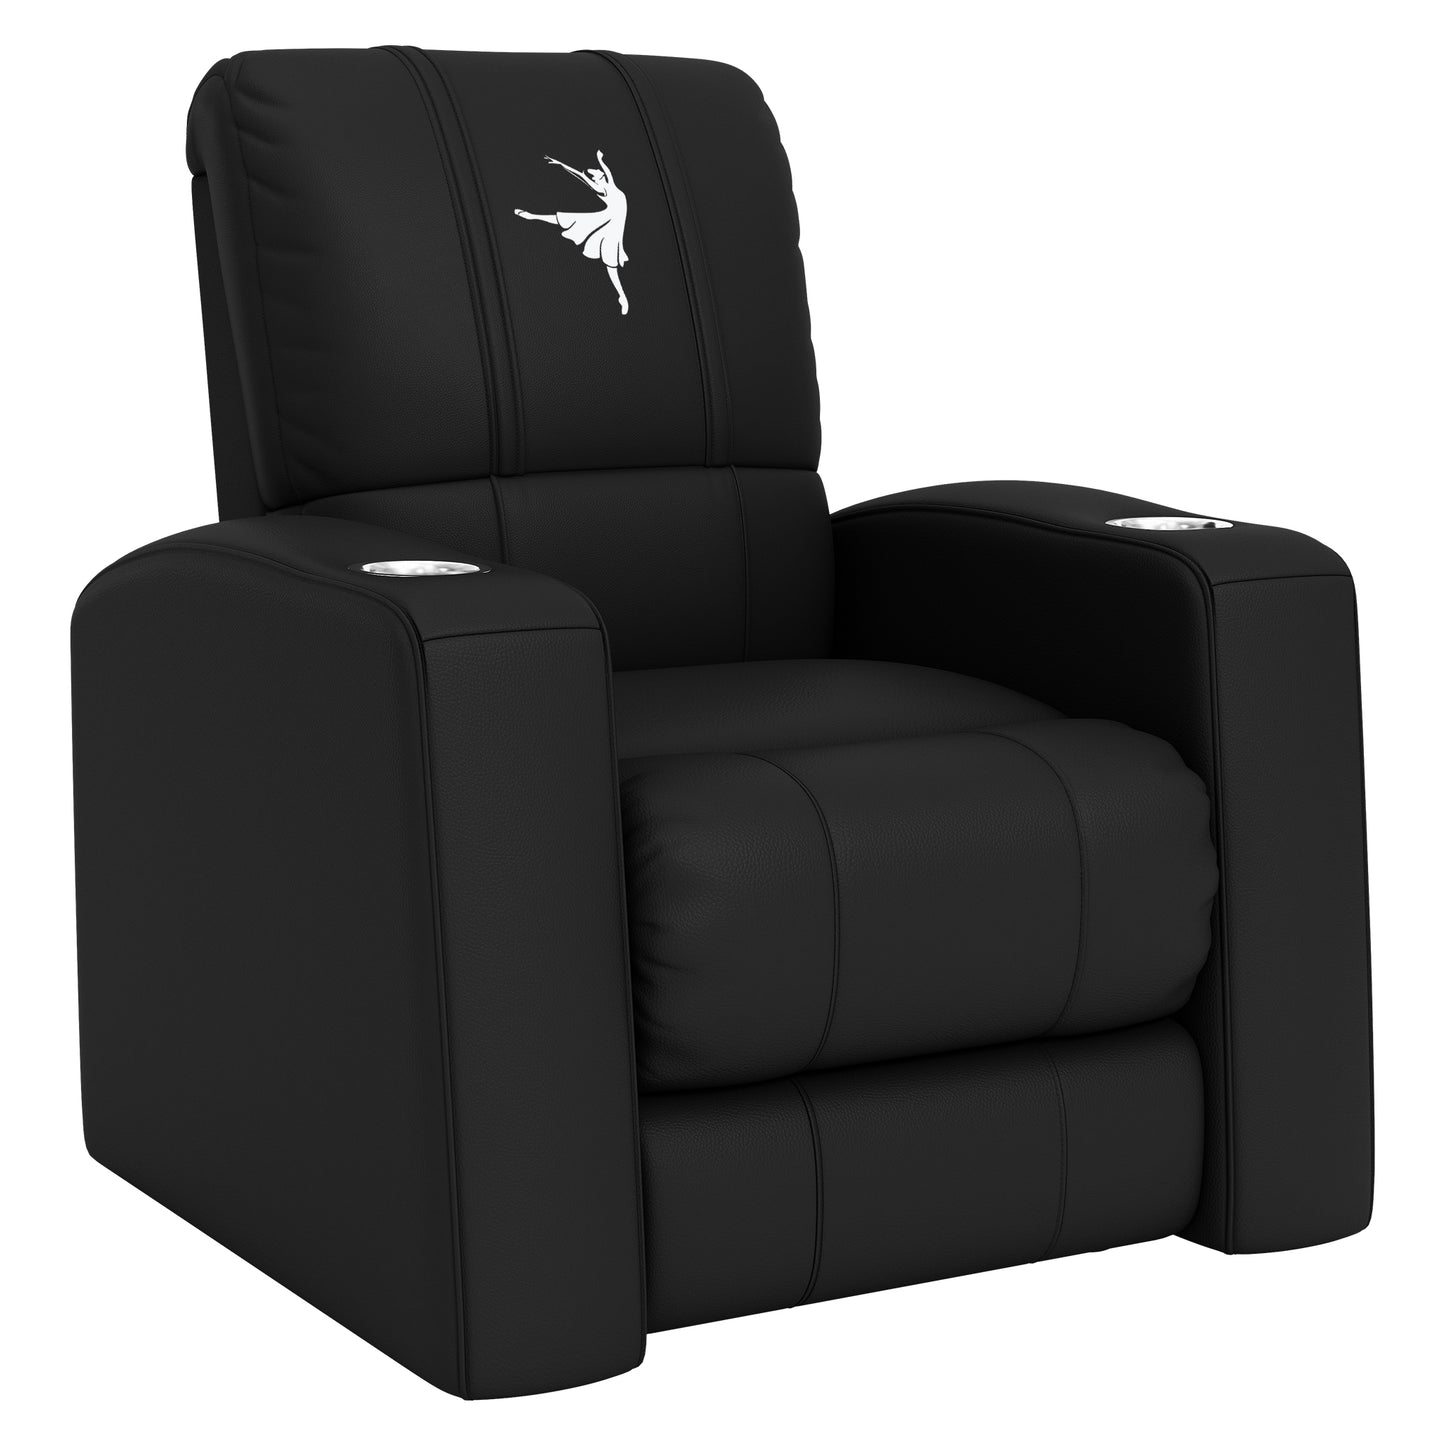 Relax Home Theater Recliner with Ballerina Logo Panel